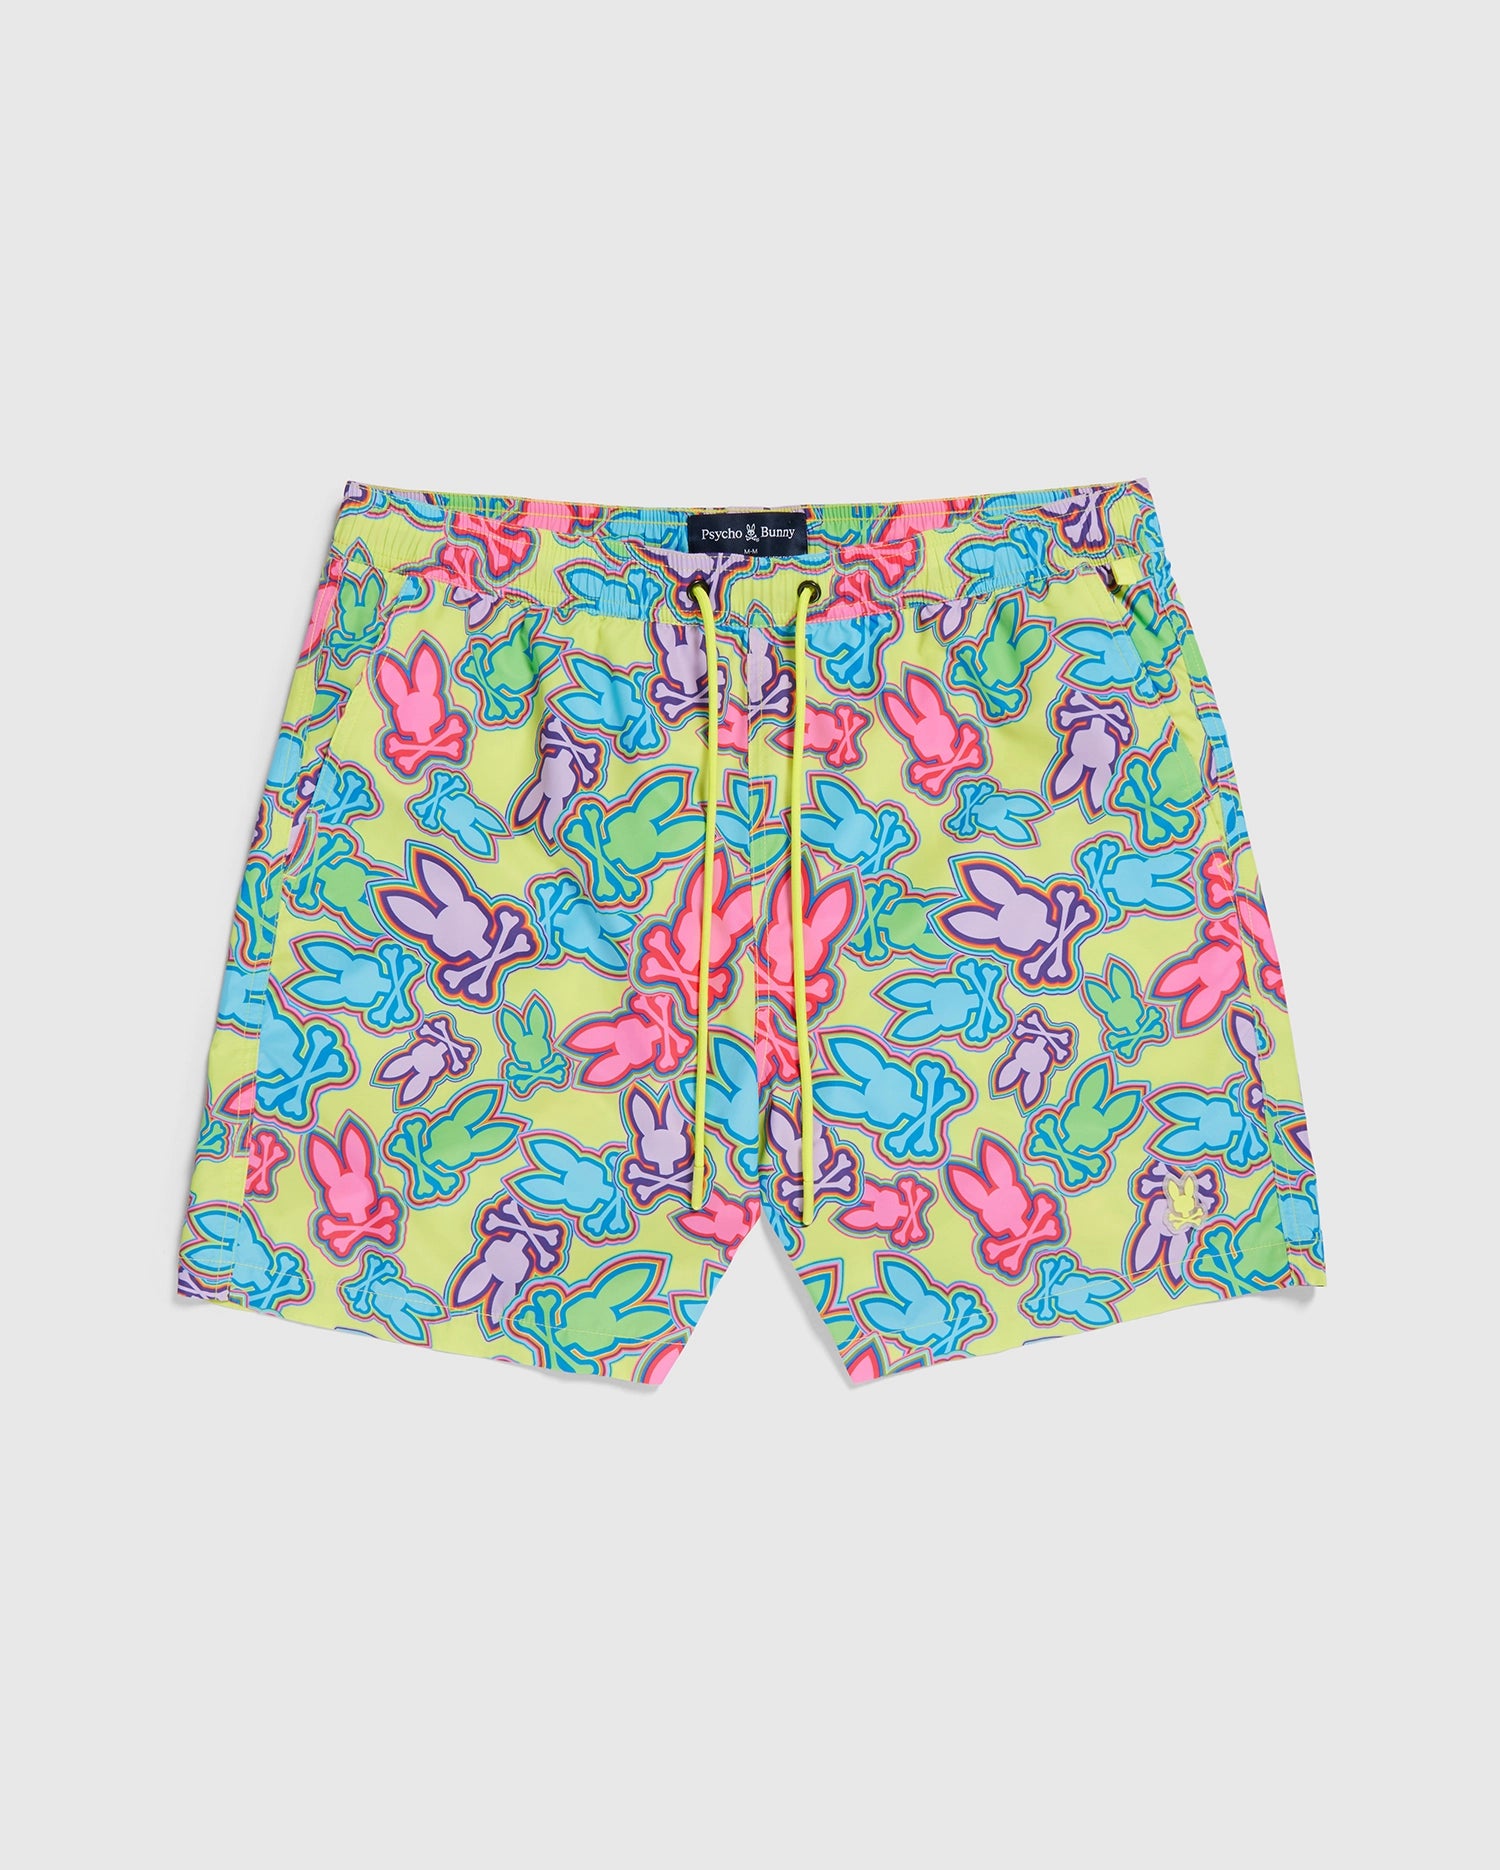 Color changing Psycho Bunny shorts, now available exclusively